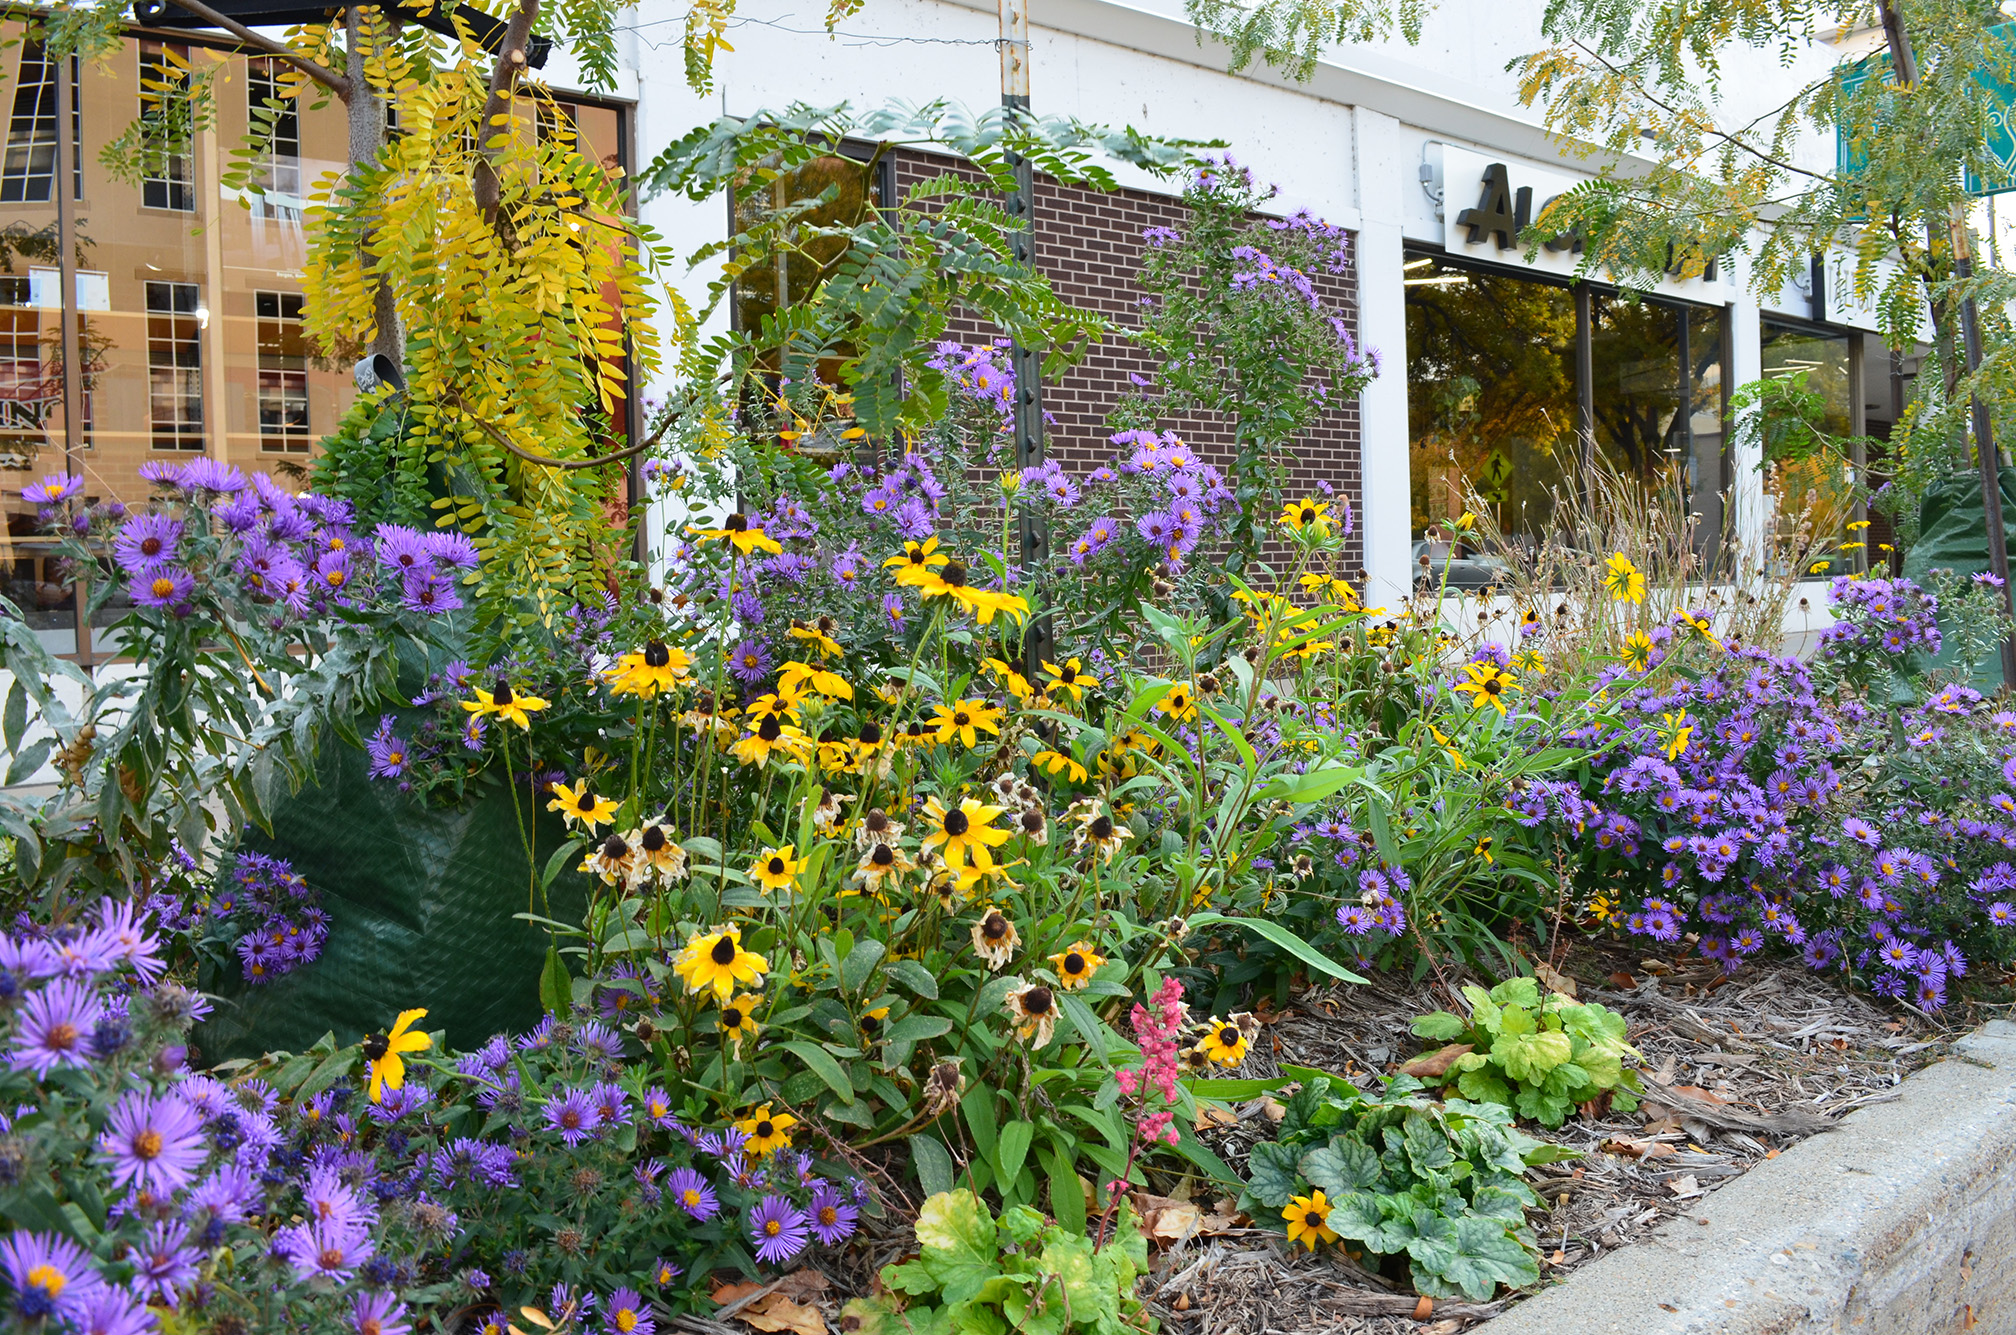 A flower bed beside a street in a downtown. The flowers include purple asters and yellow coneflowers. Behind are large mirrored glass windows of a store, which reflect the buildings opposite. 